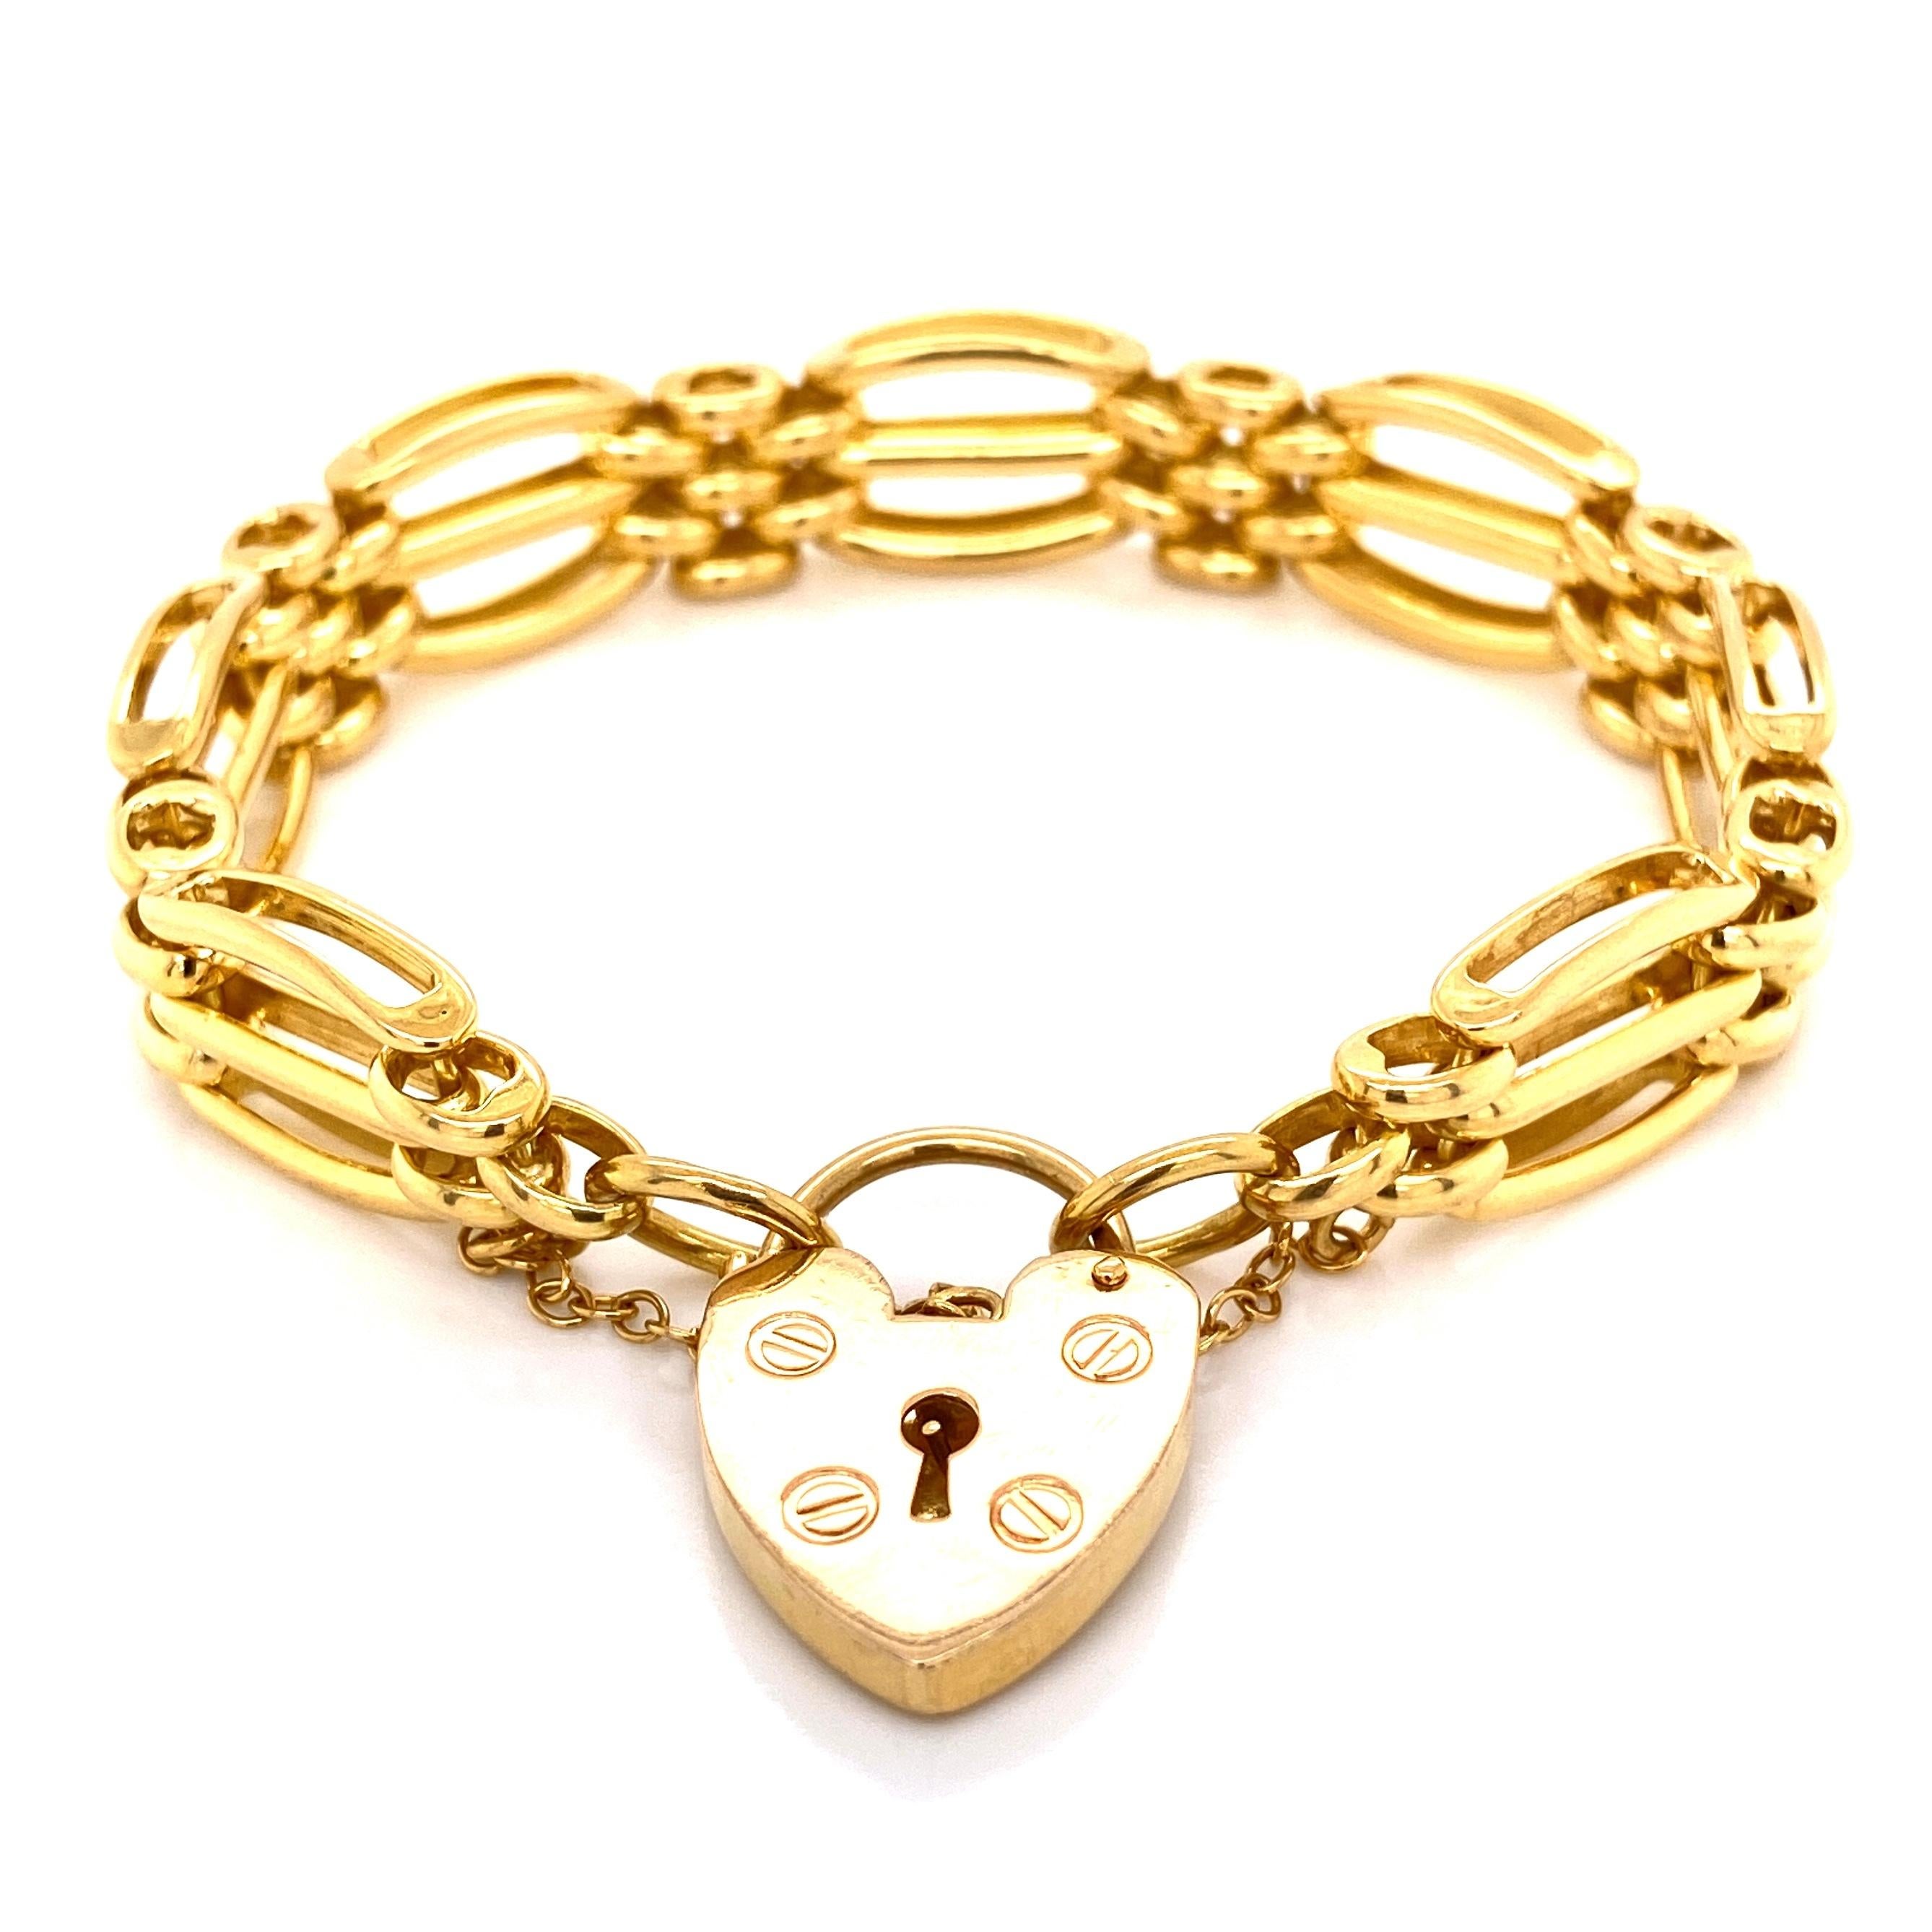 Simply Beautiful Vintage British Design! Hand crafted 18K Yellow Gold Link Bracelet with Padlock closure clasp by Charles Green & Son Ltd. U.K. United Kingdom. Marked: CG&S. Hallmark corresponds to: Birmingham, England. Classic and Chic…Yours to